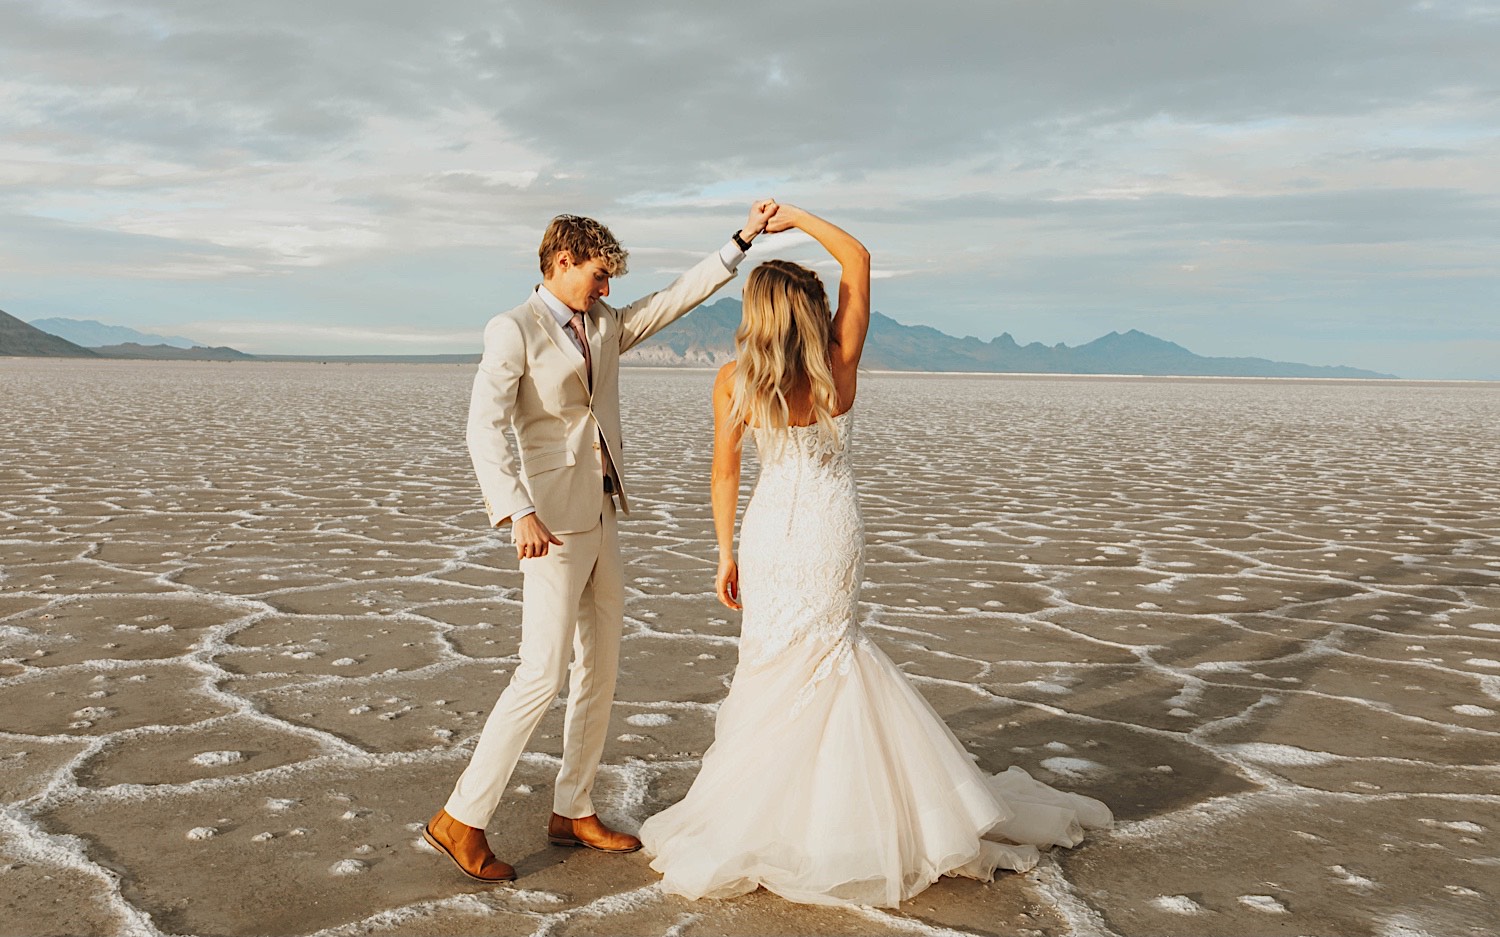 During their elopement in the Utah Salt Flats, a bride dances with the groom as he spins her around while holding her hand